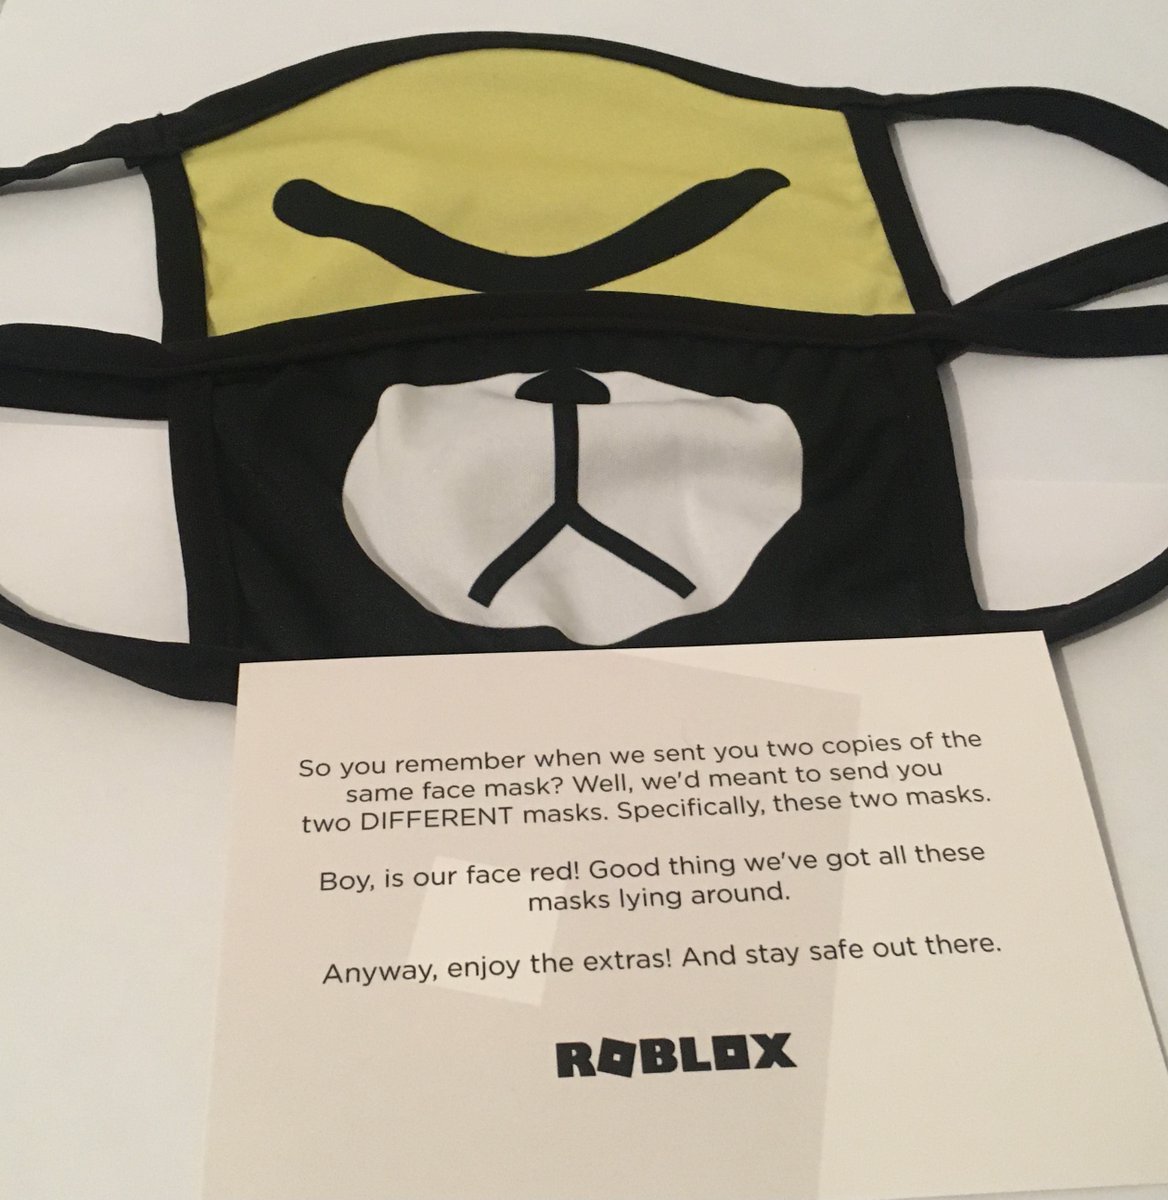 Muneeb Code Muneeb On Twitter Thanks So Much Roblox For The Extra Face Masks I Love The Bear One - roblox bear mask code